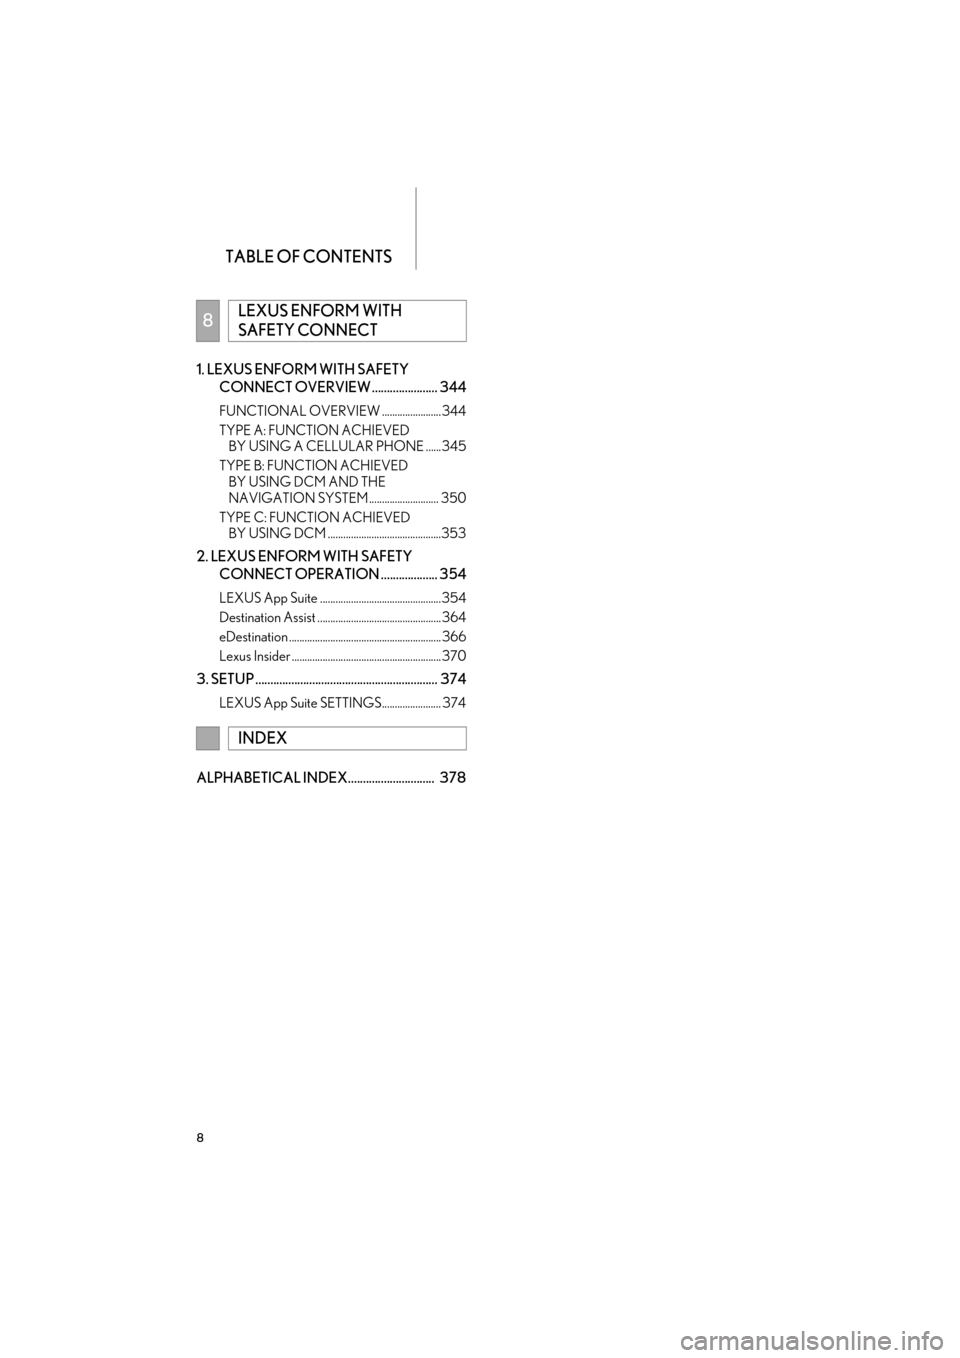 Lexus GX460 2014  Navigation Manual TABLE OF CONTENTS
8
GX_EMVN_OM60K84U_(U)13.07.02     11:50
1. LEXUS ENFORM WITH SAFETY CONNECT OVERVIEW ...................... 344
FUNCTIONAL OVERVIEW ....................... 344
TYPE A: FUNCTION ACHI